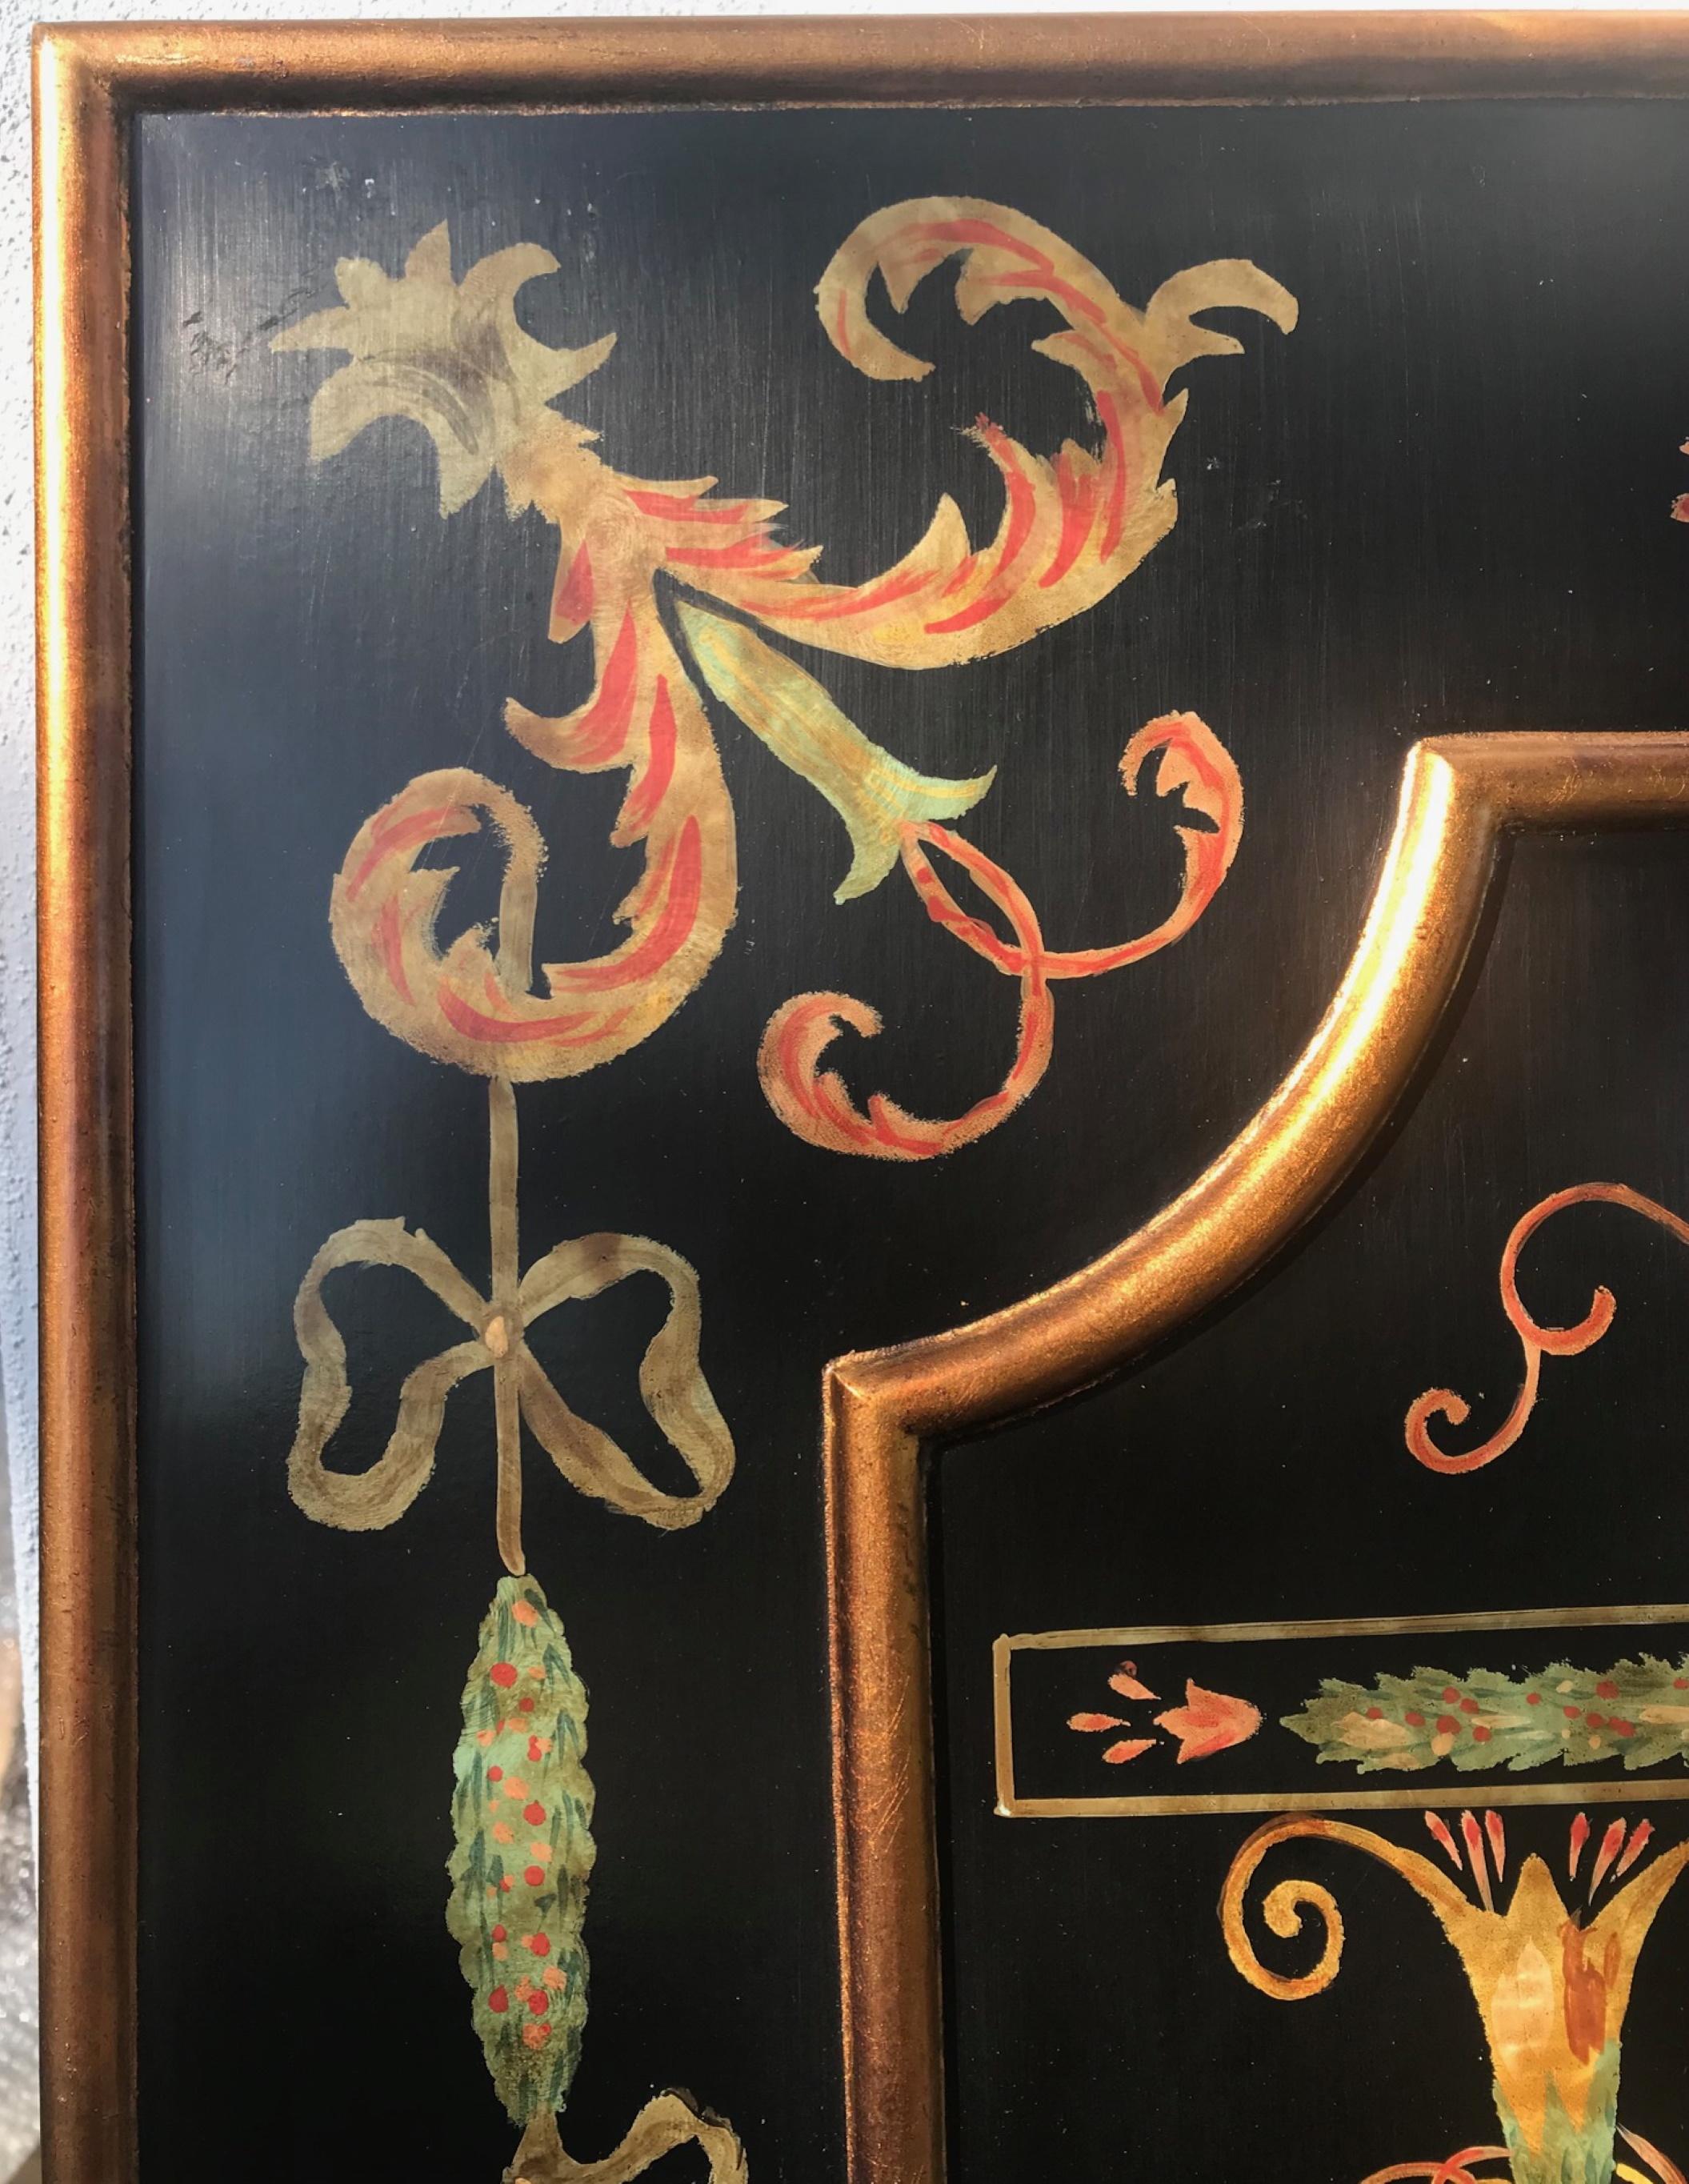 Pair of 20th Century Large Venetian Renaissance Revival Wood Panels In Good Condition For Sale In Vero Beach, FL